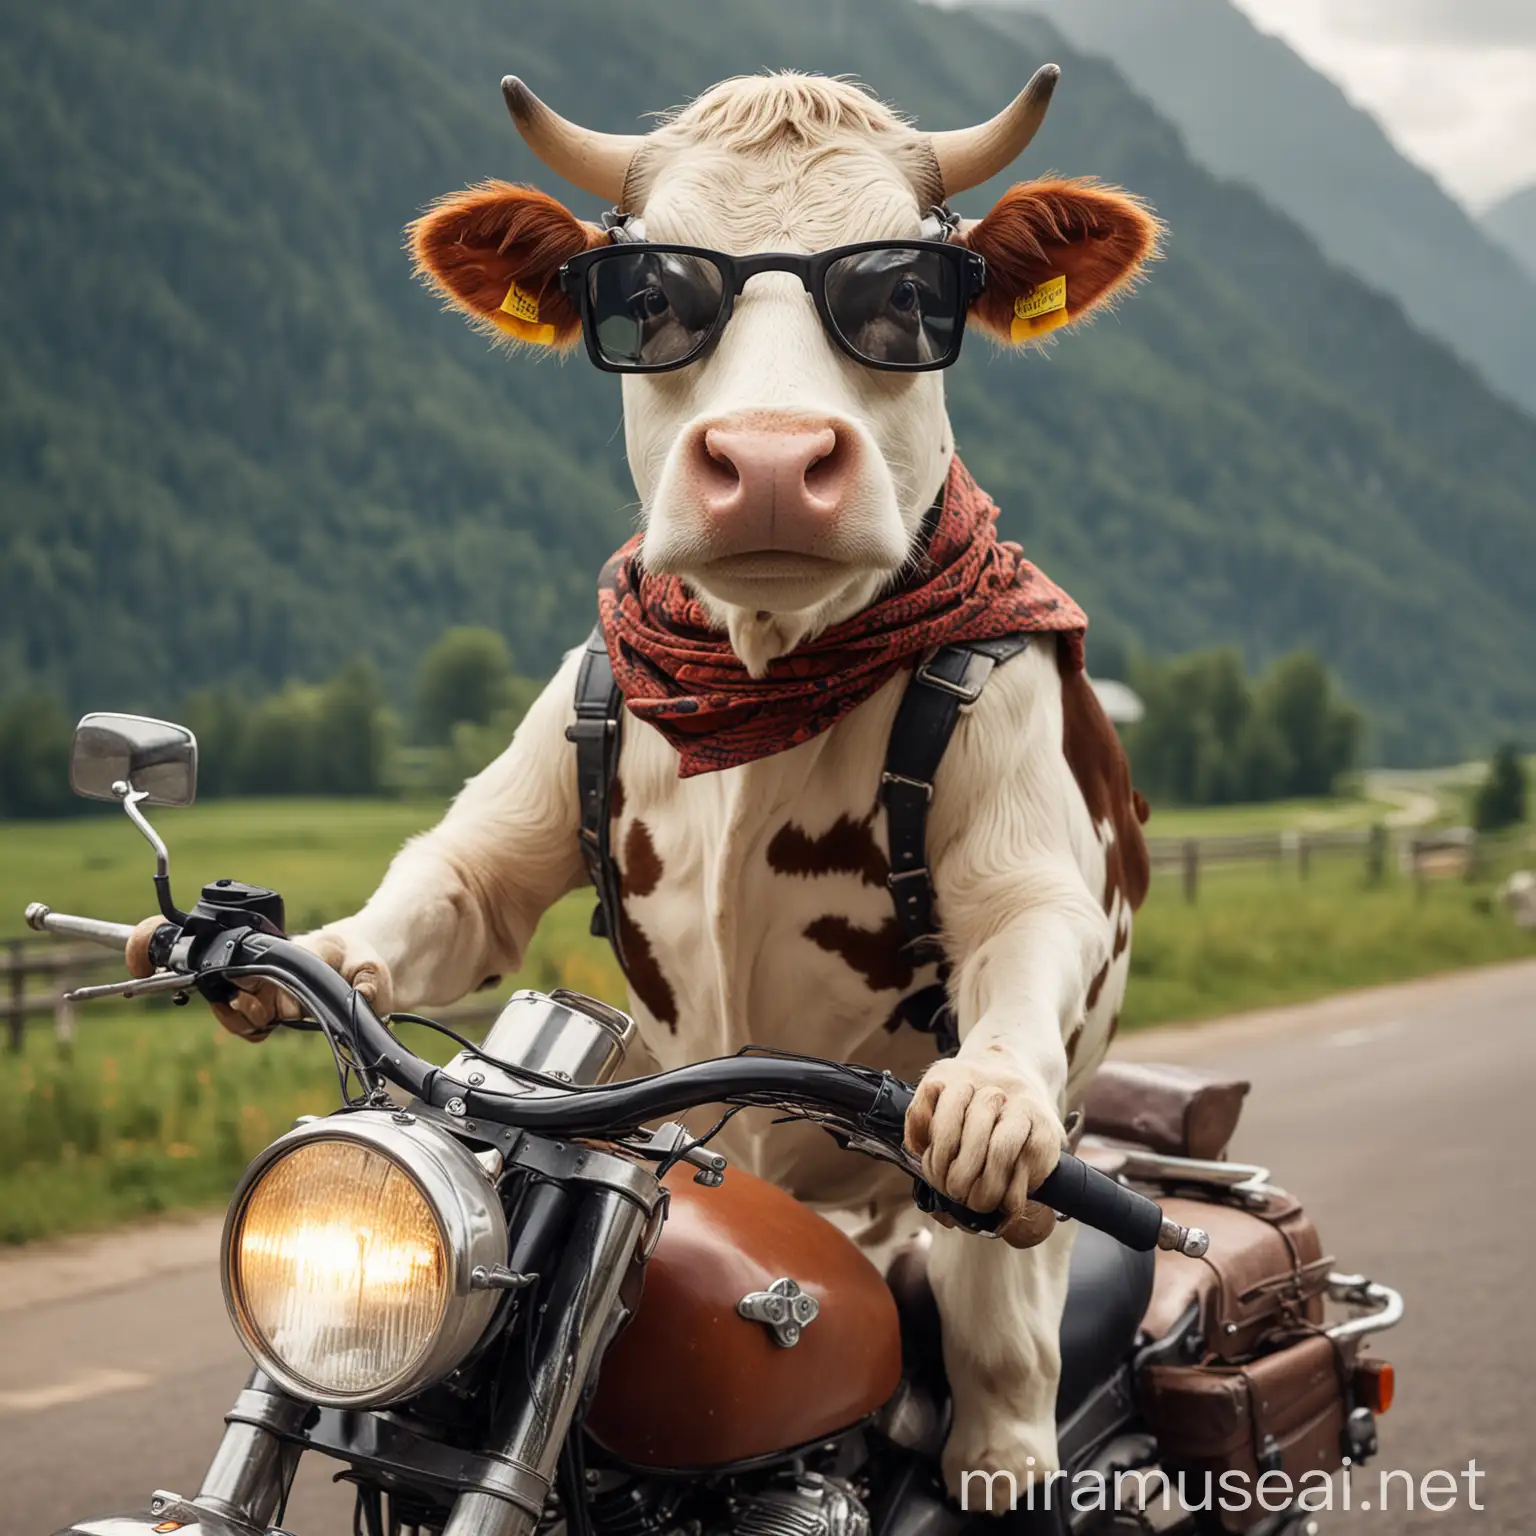 cow with glasses riding a motorcycle
